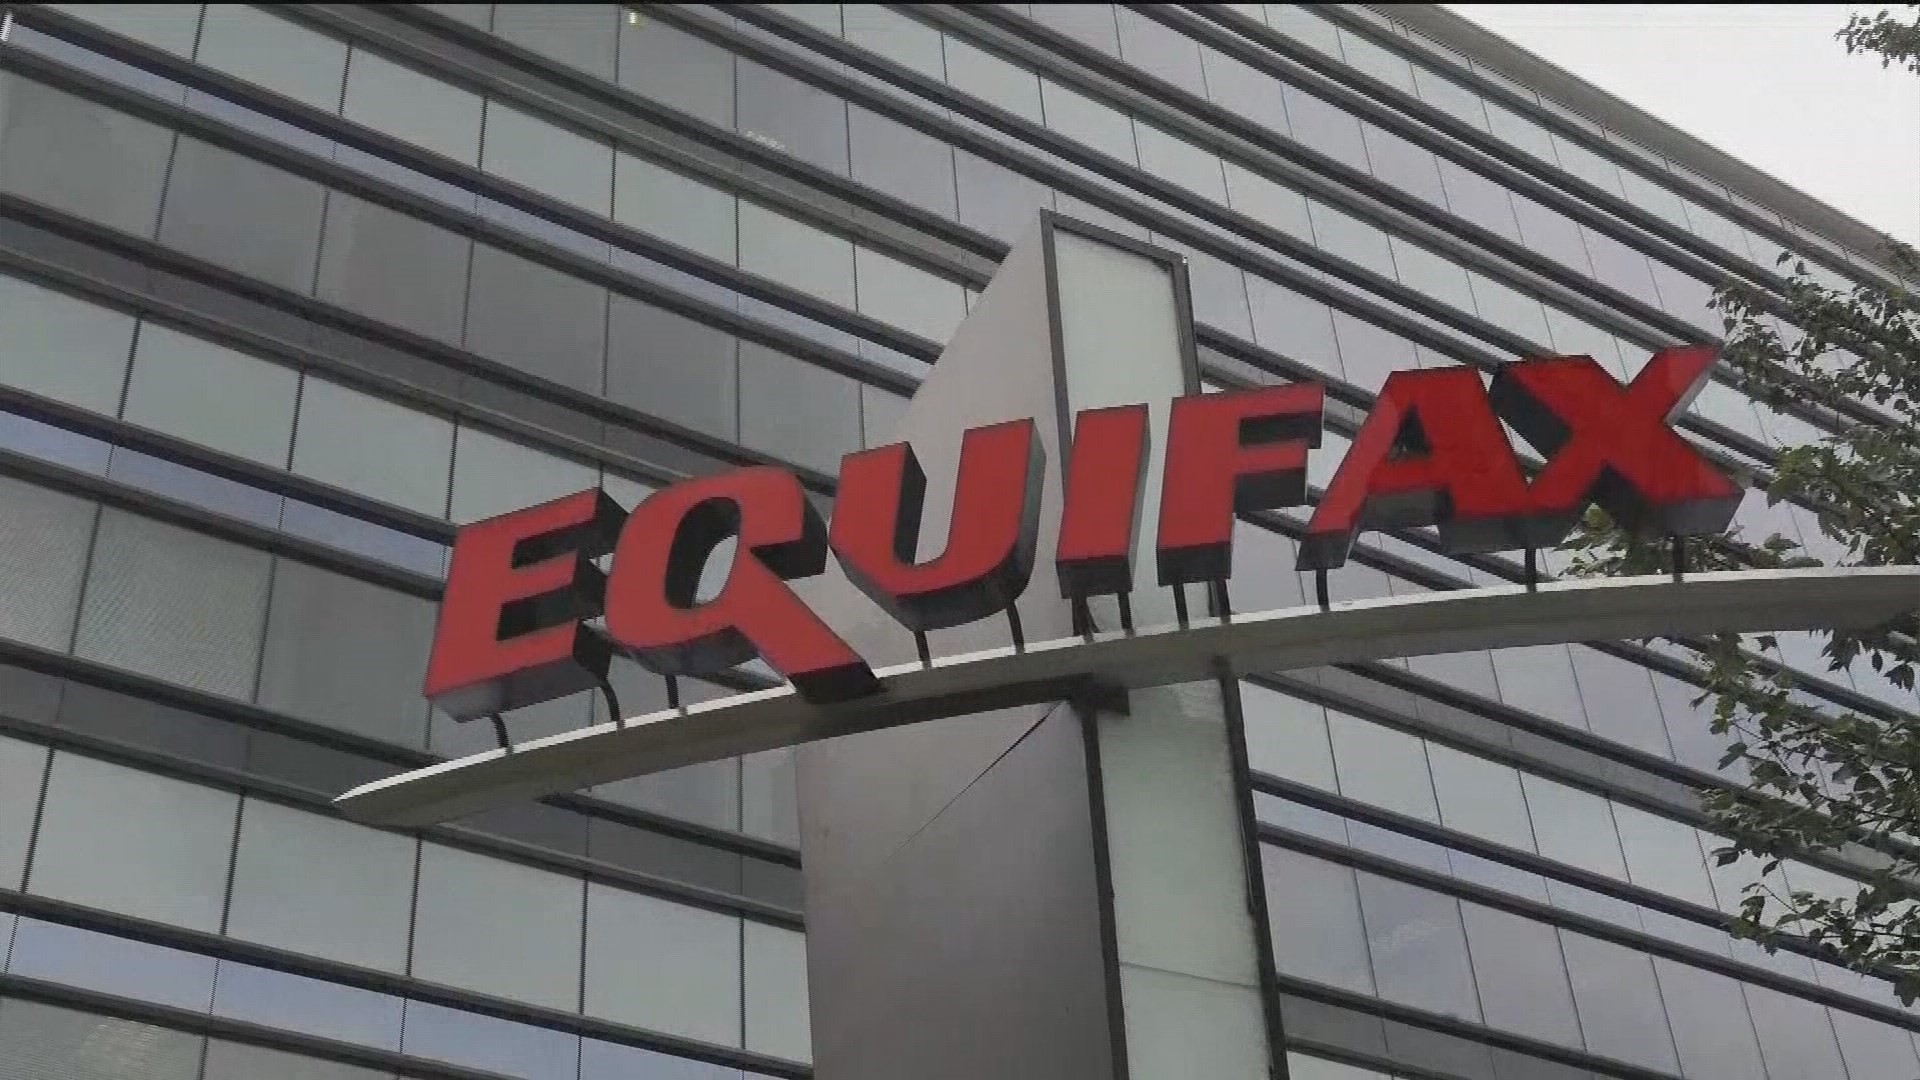 Equifax now has to provide up to $425 million in restitution for consumers and work to improve their security practices, but what does this mean for the average citizen? Washington State Attorney General Bob Ferguson discusses the current state of the Equifax debacle and explains what the next steps are.